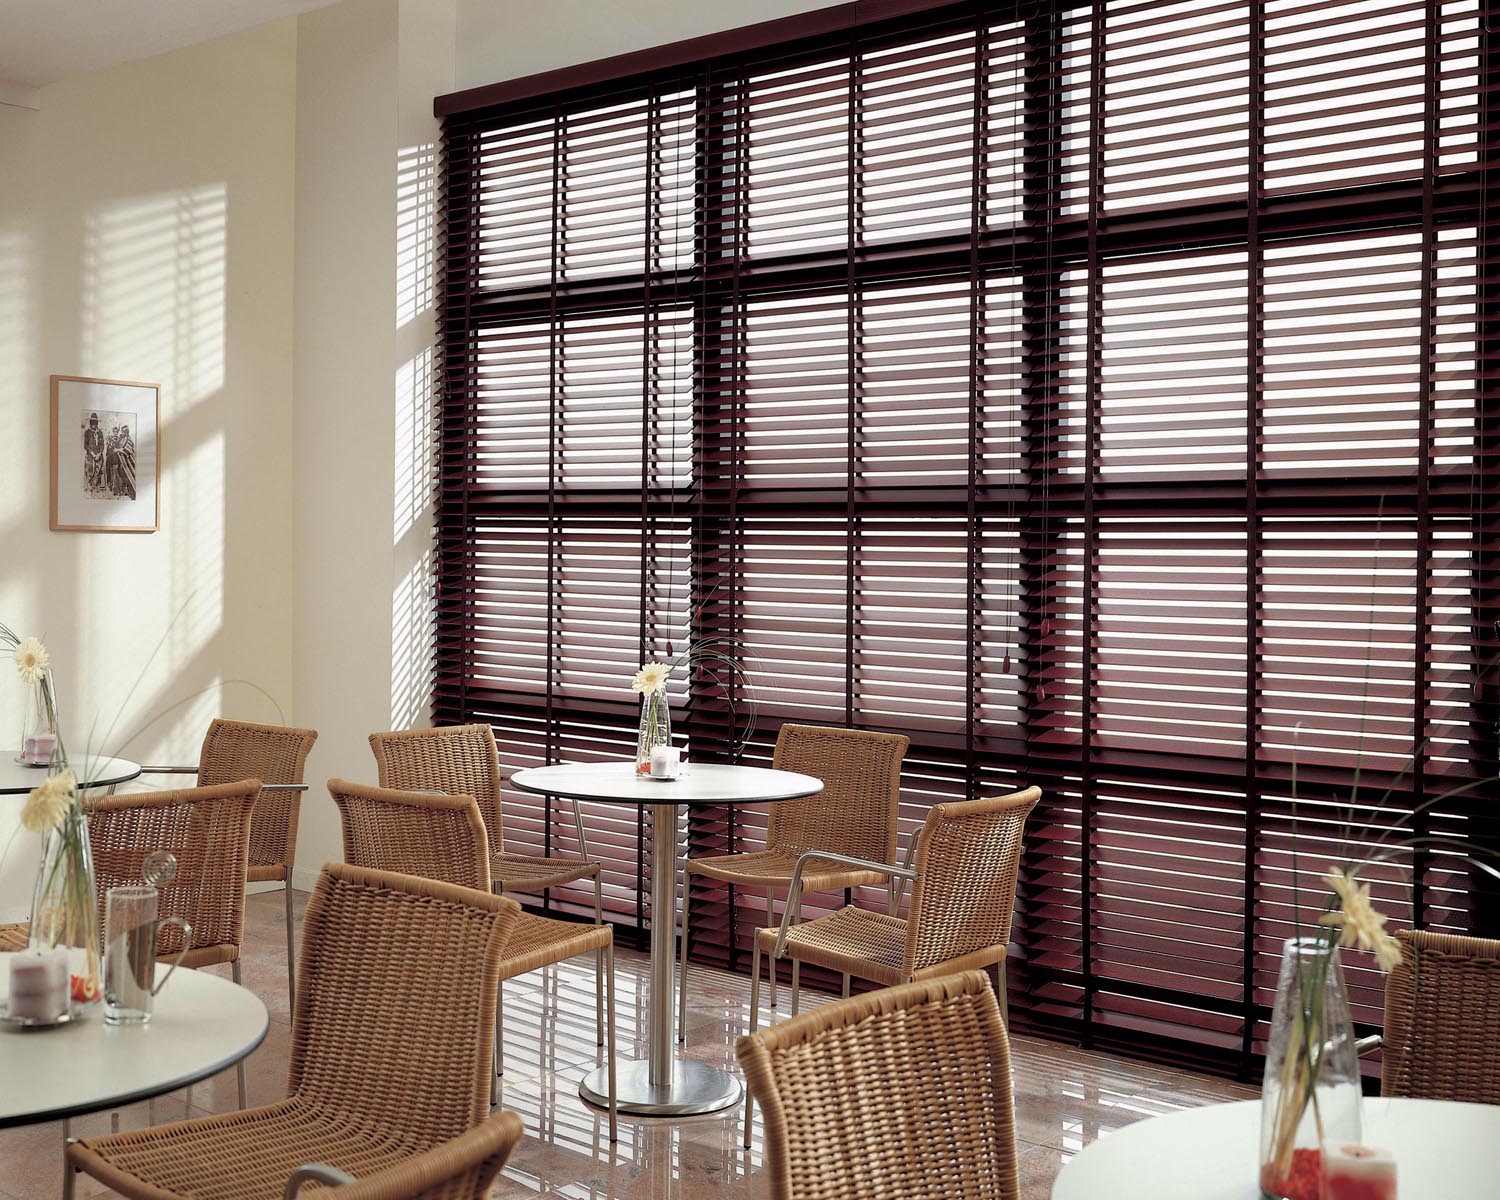 Bali Blinds Northern Heights 2 3-8 Inch Wood Blinds (3211) photo